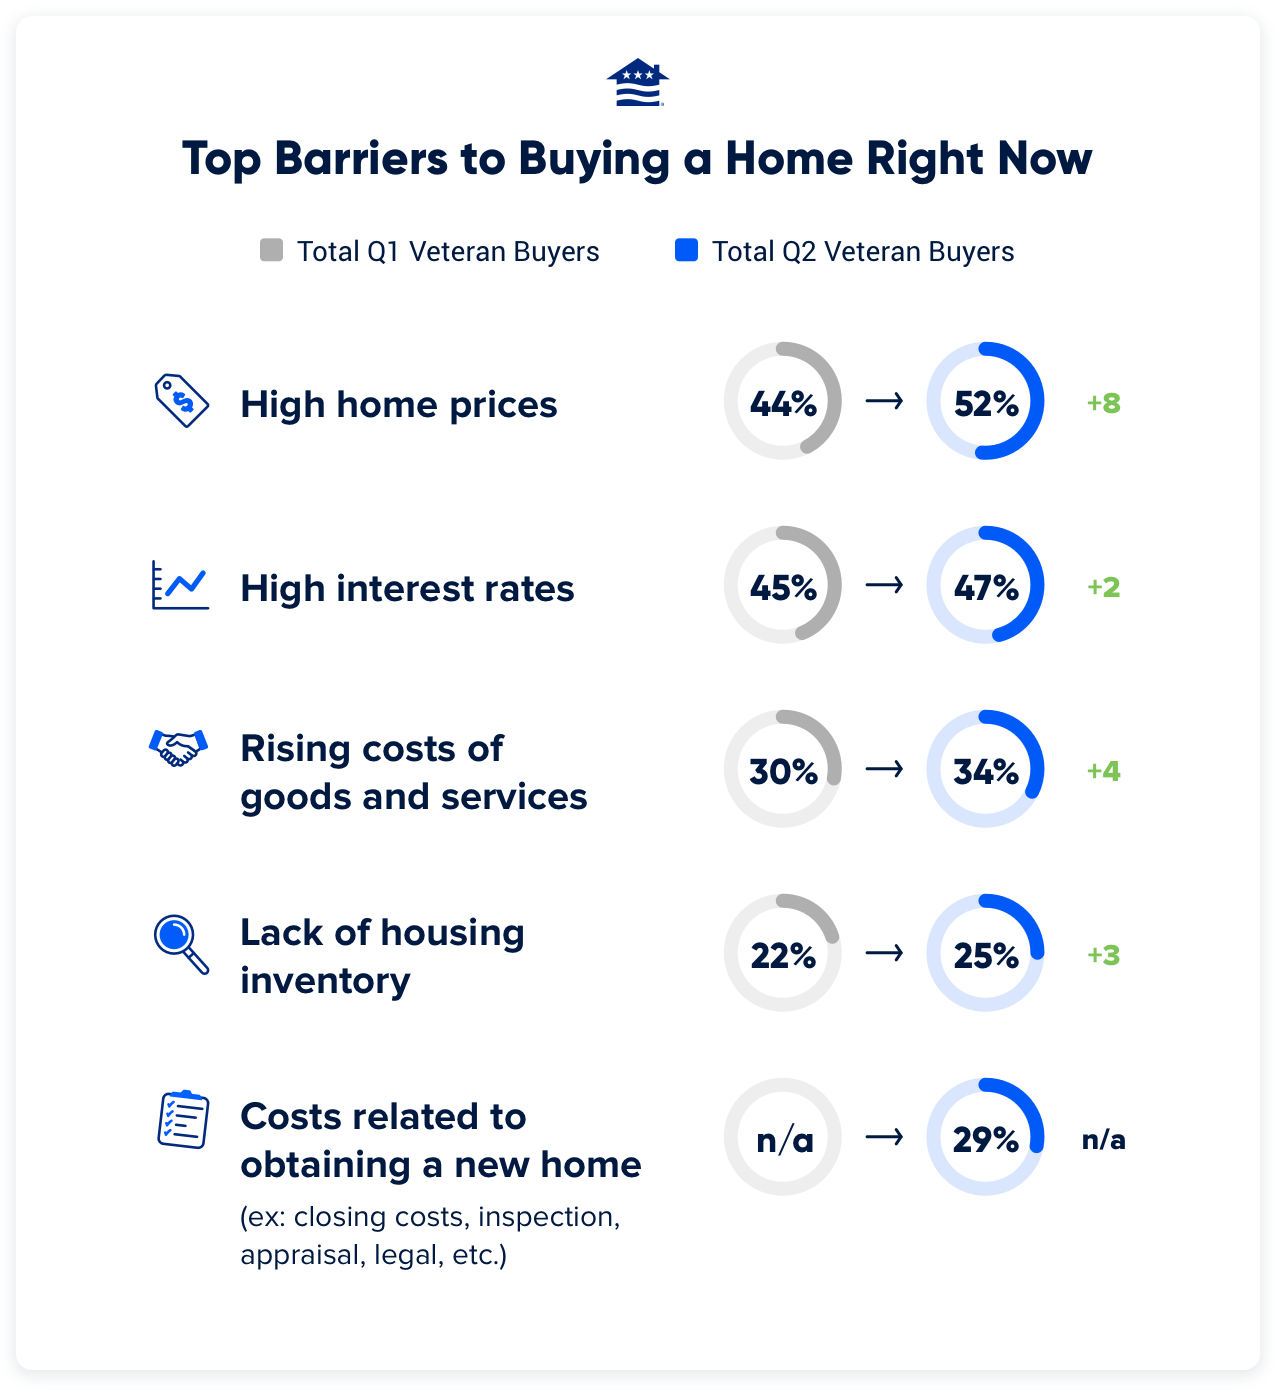 This chart shows the top barriers to homebuying cited by Veterans in the first quarter of this year and the second quarter.